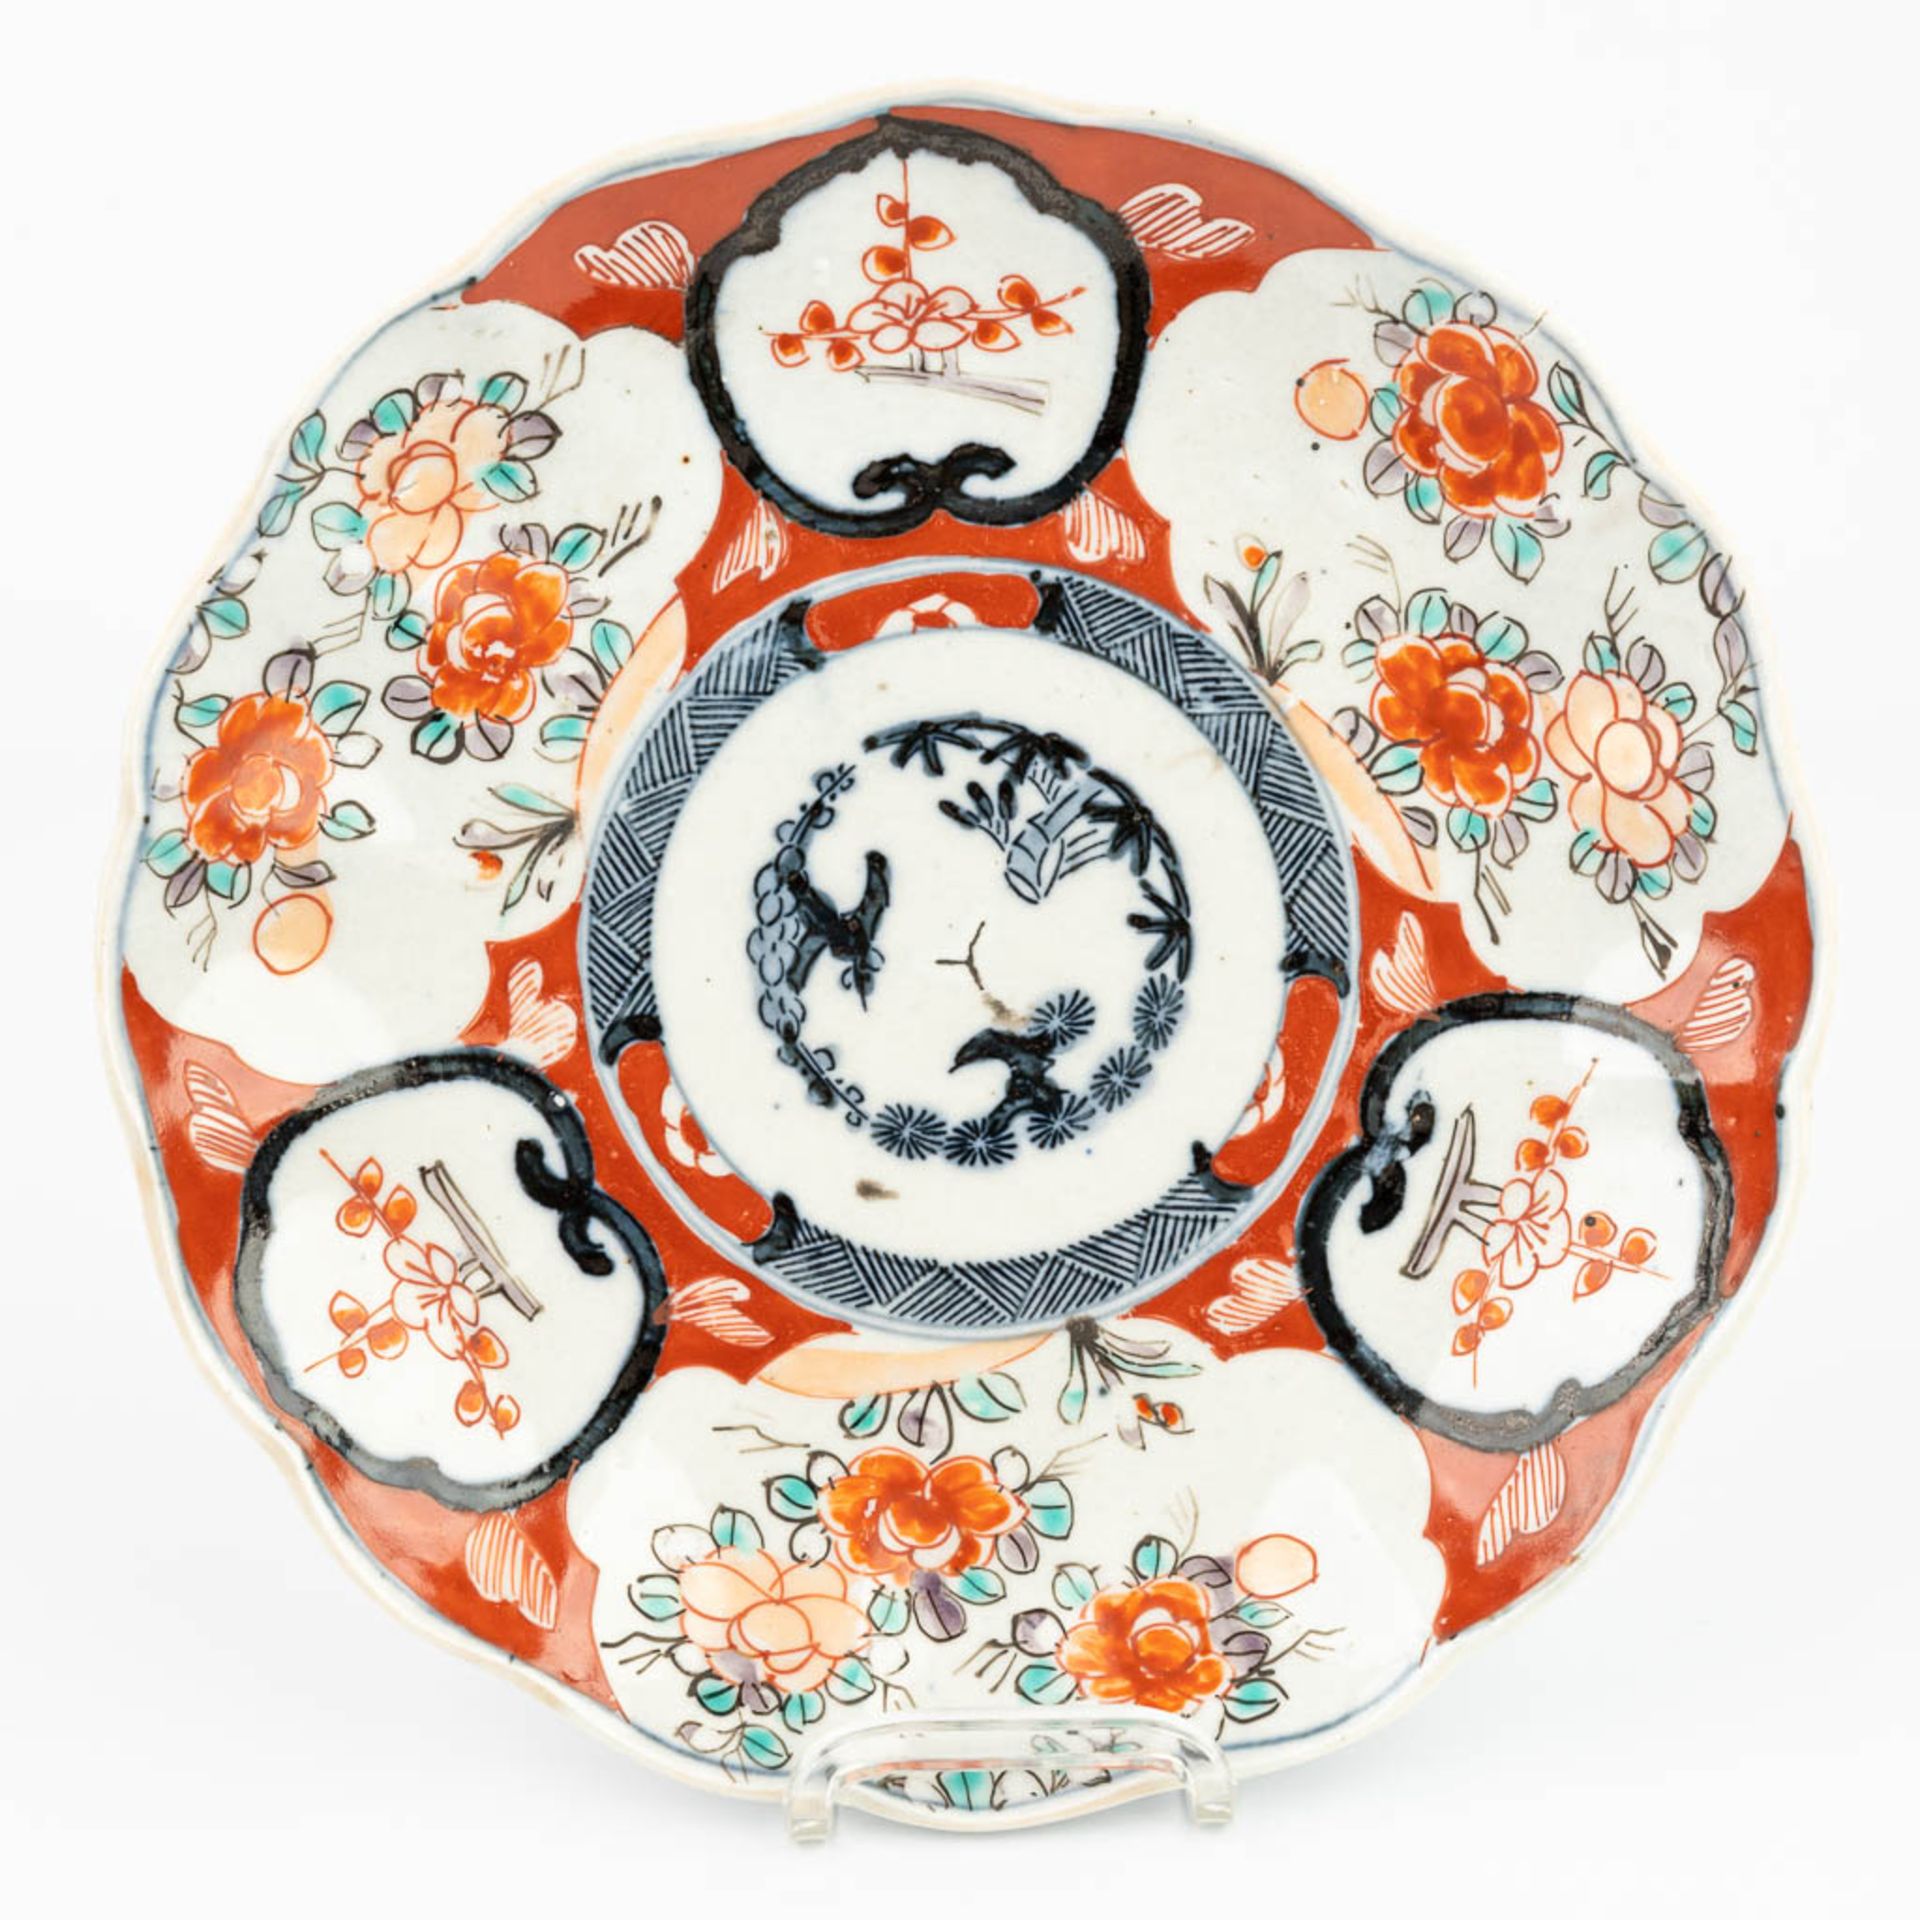 A collection of 7 Chinese and Japanese plates made of porcelain, Imari. - Image 13 of 13